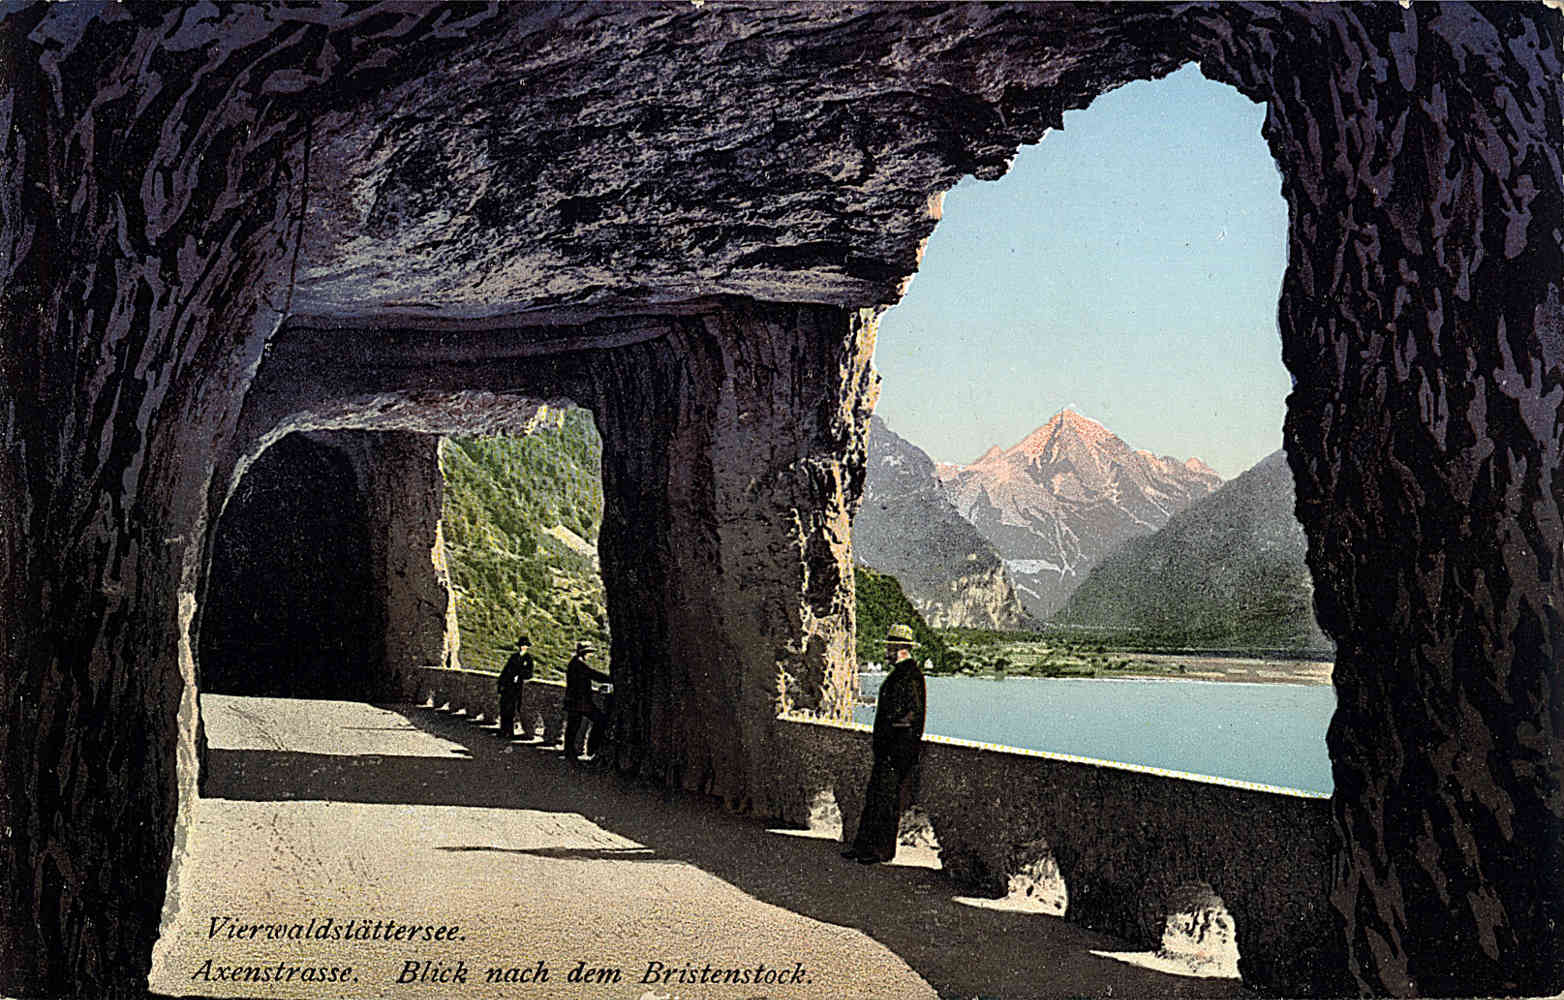 Enlarged view: Axenstrasse, Lake Lucerne ( CC0 1.0 / ETH-Library Zurich / Photographer: Unknown)